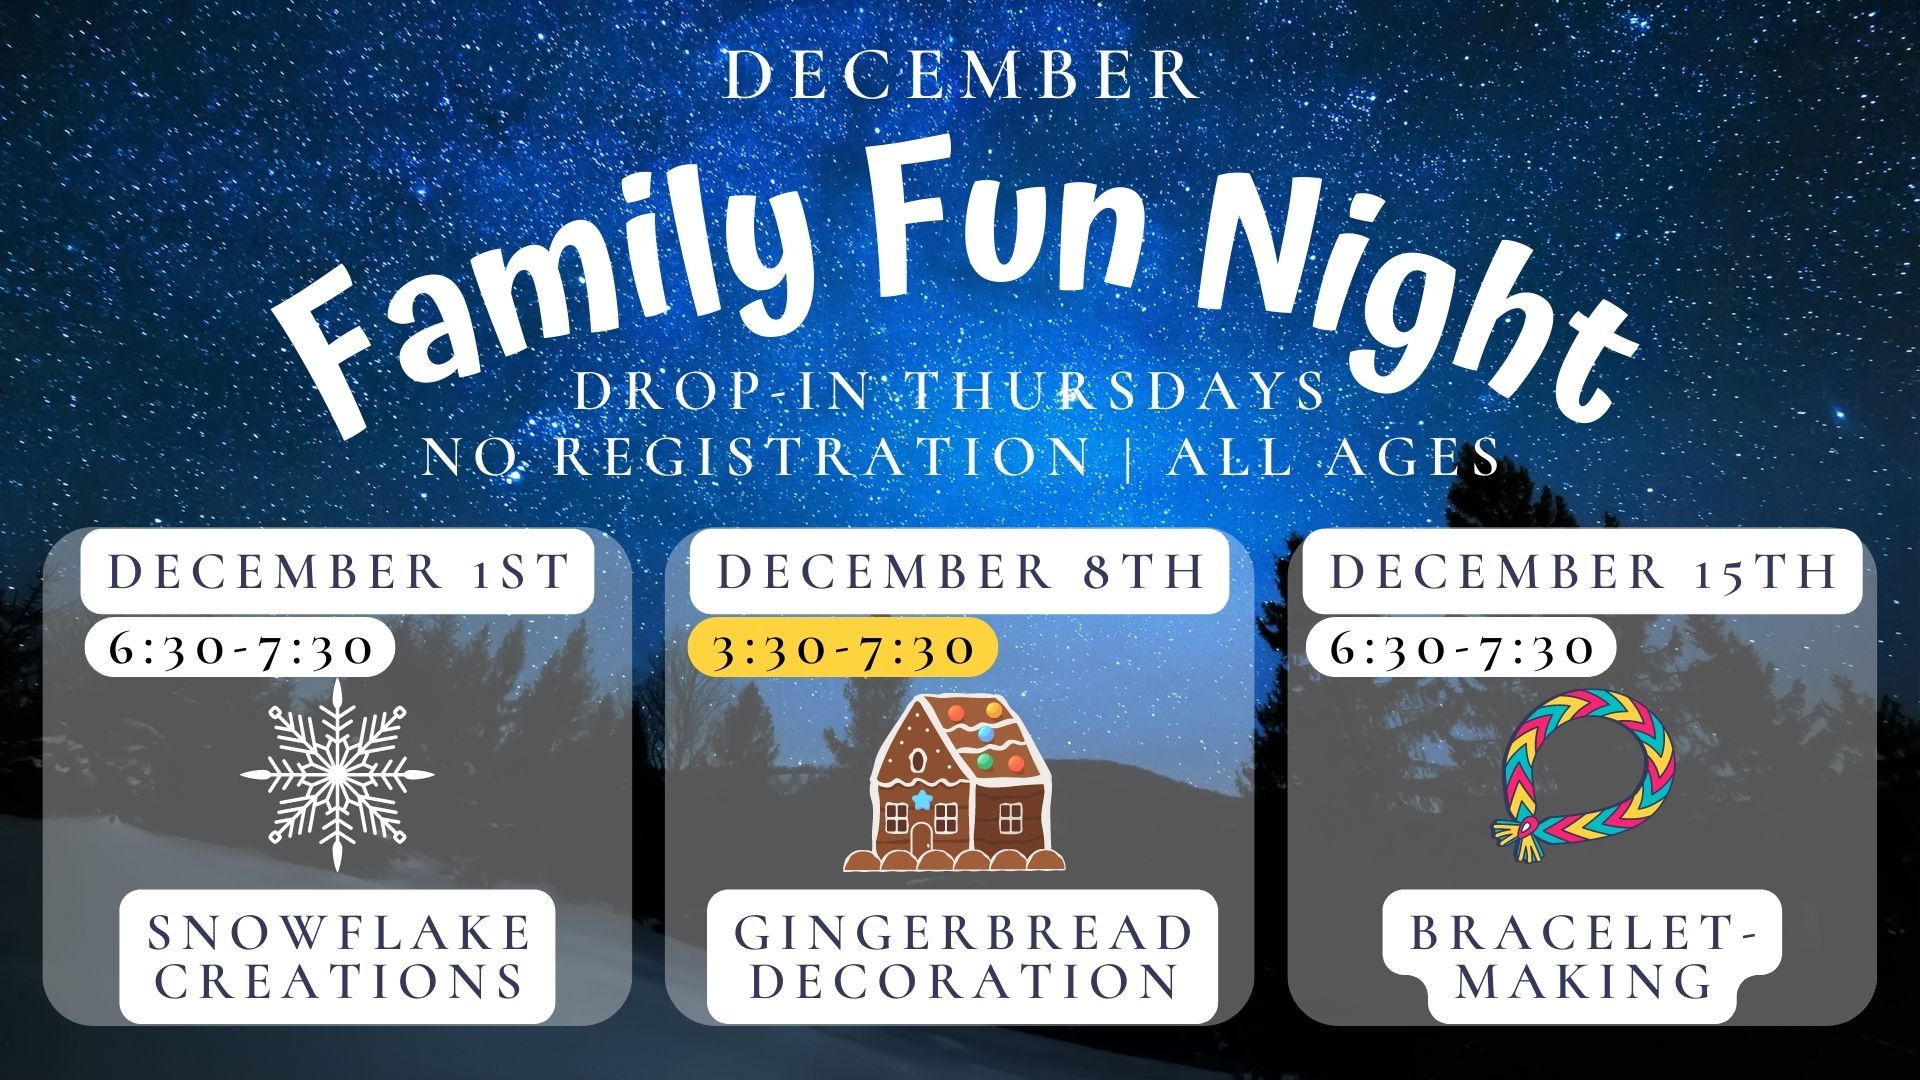 Graphic of a stary night.  Text reads  December Family Fun Night Drop in Thursdays, No registration, all ages.  Thursday 6:30-7:30   December 1st: Snowflake Creations.  Thursday 3:30-7:30 December 8th  Gingerbread Decoration.   Thursday, 6:30-7:30 December 15th: Bracelet Making